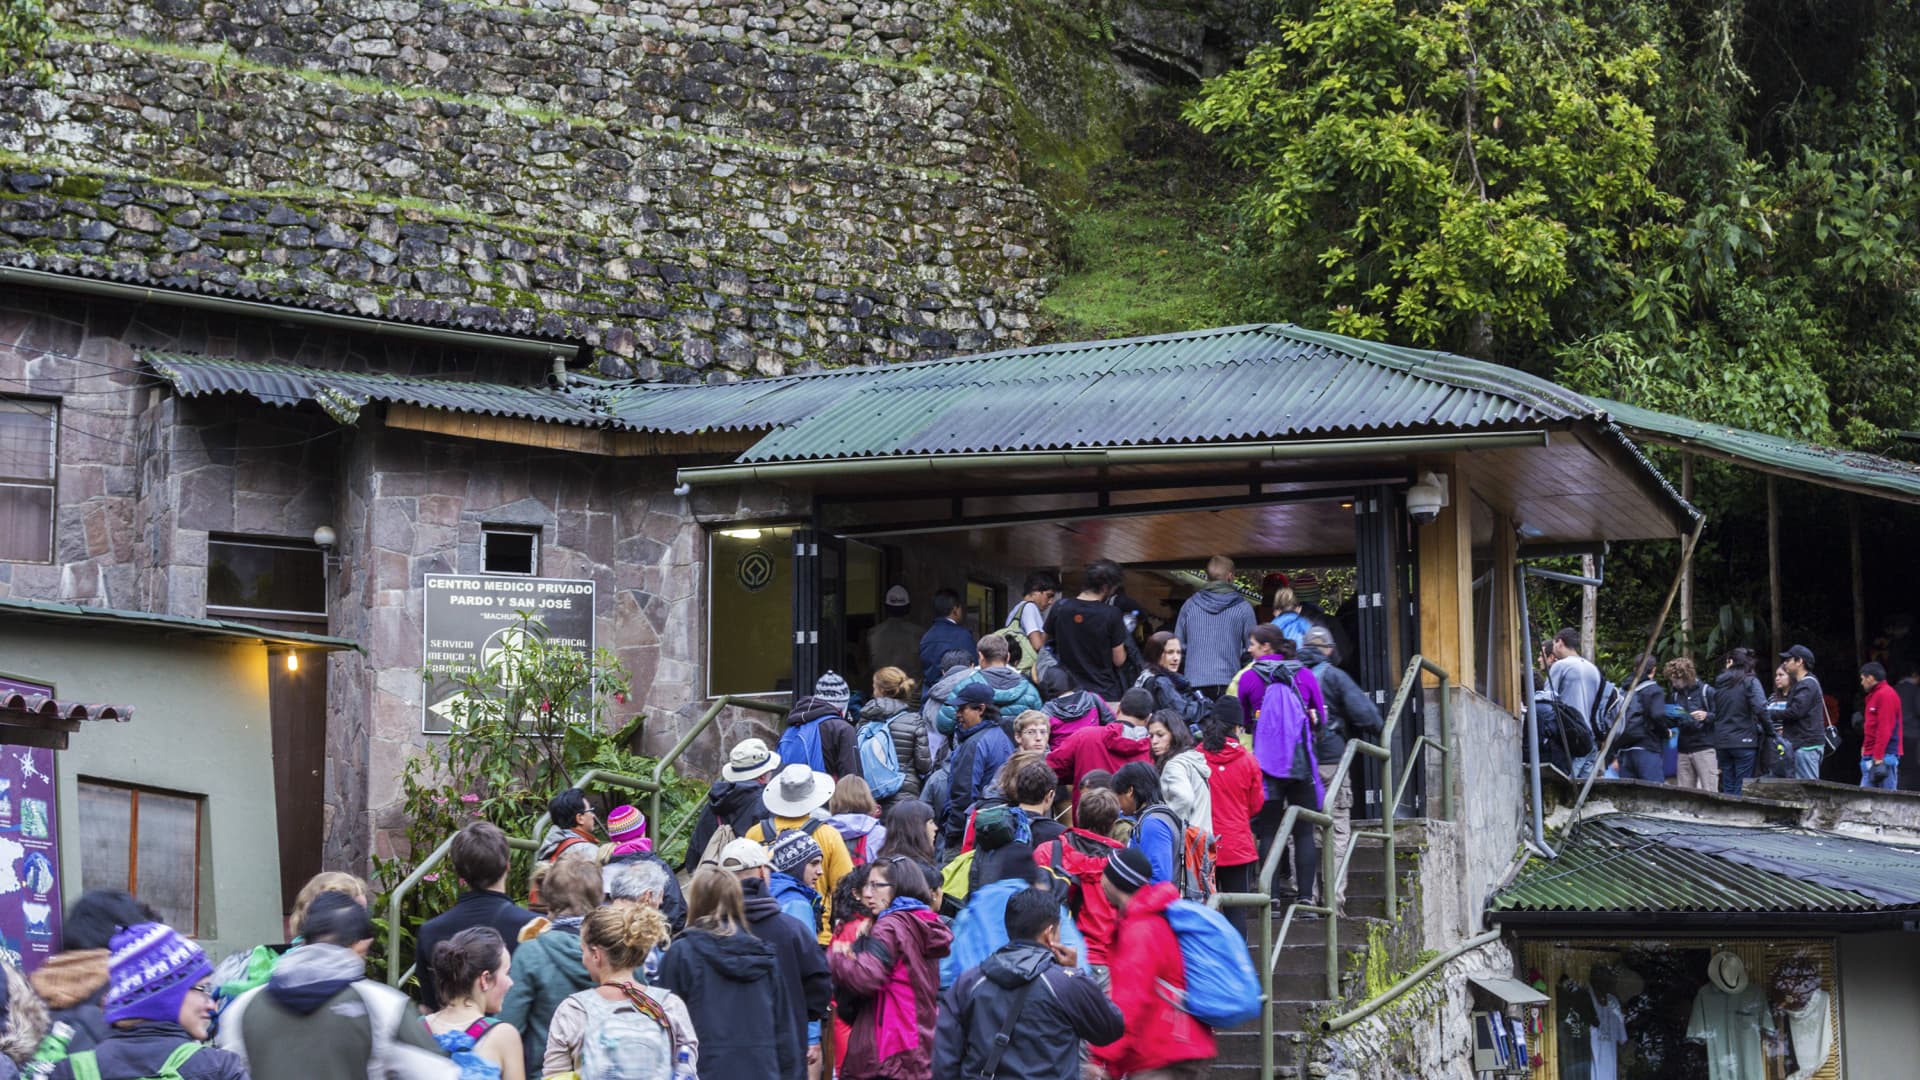 Machu Picchu was built to accommodate some 400 residents with some 1,200 additional people during festivals, according to archaeologist Jose Miguel Bastante.